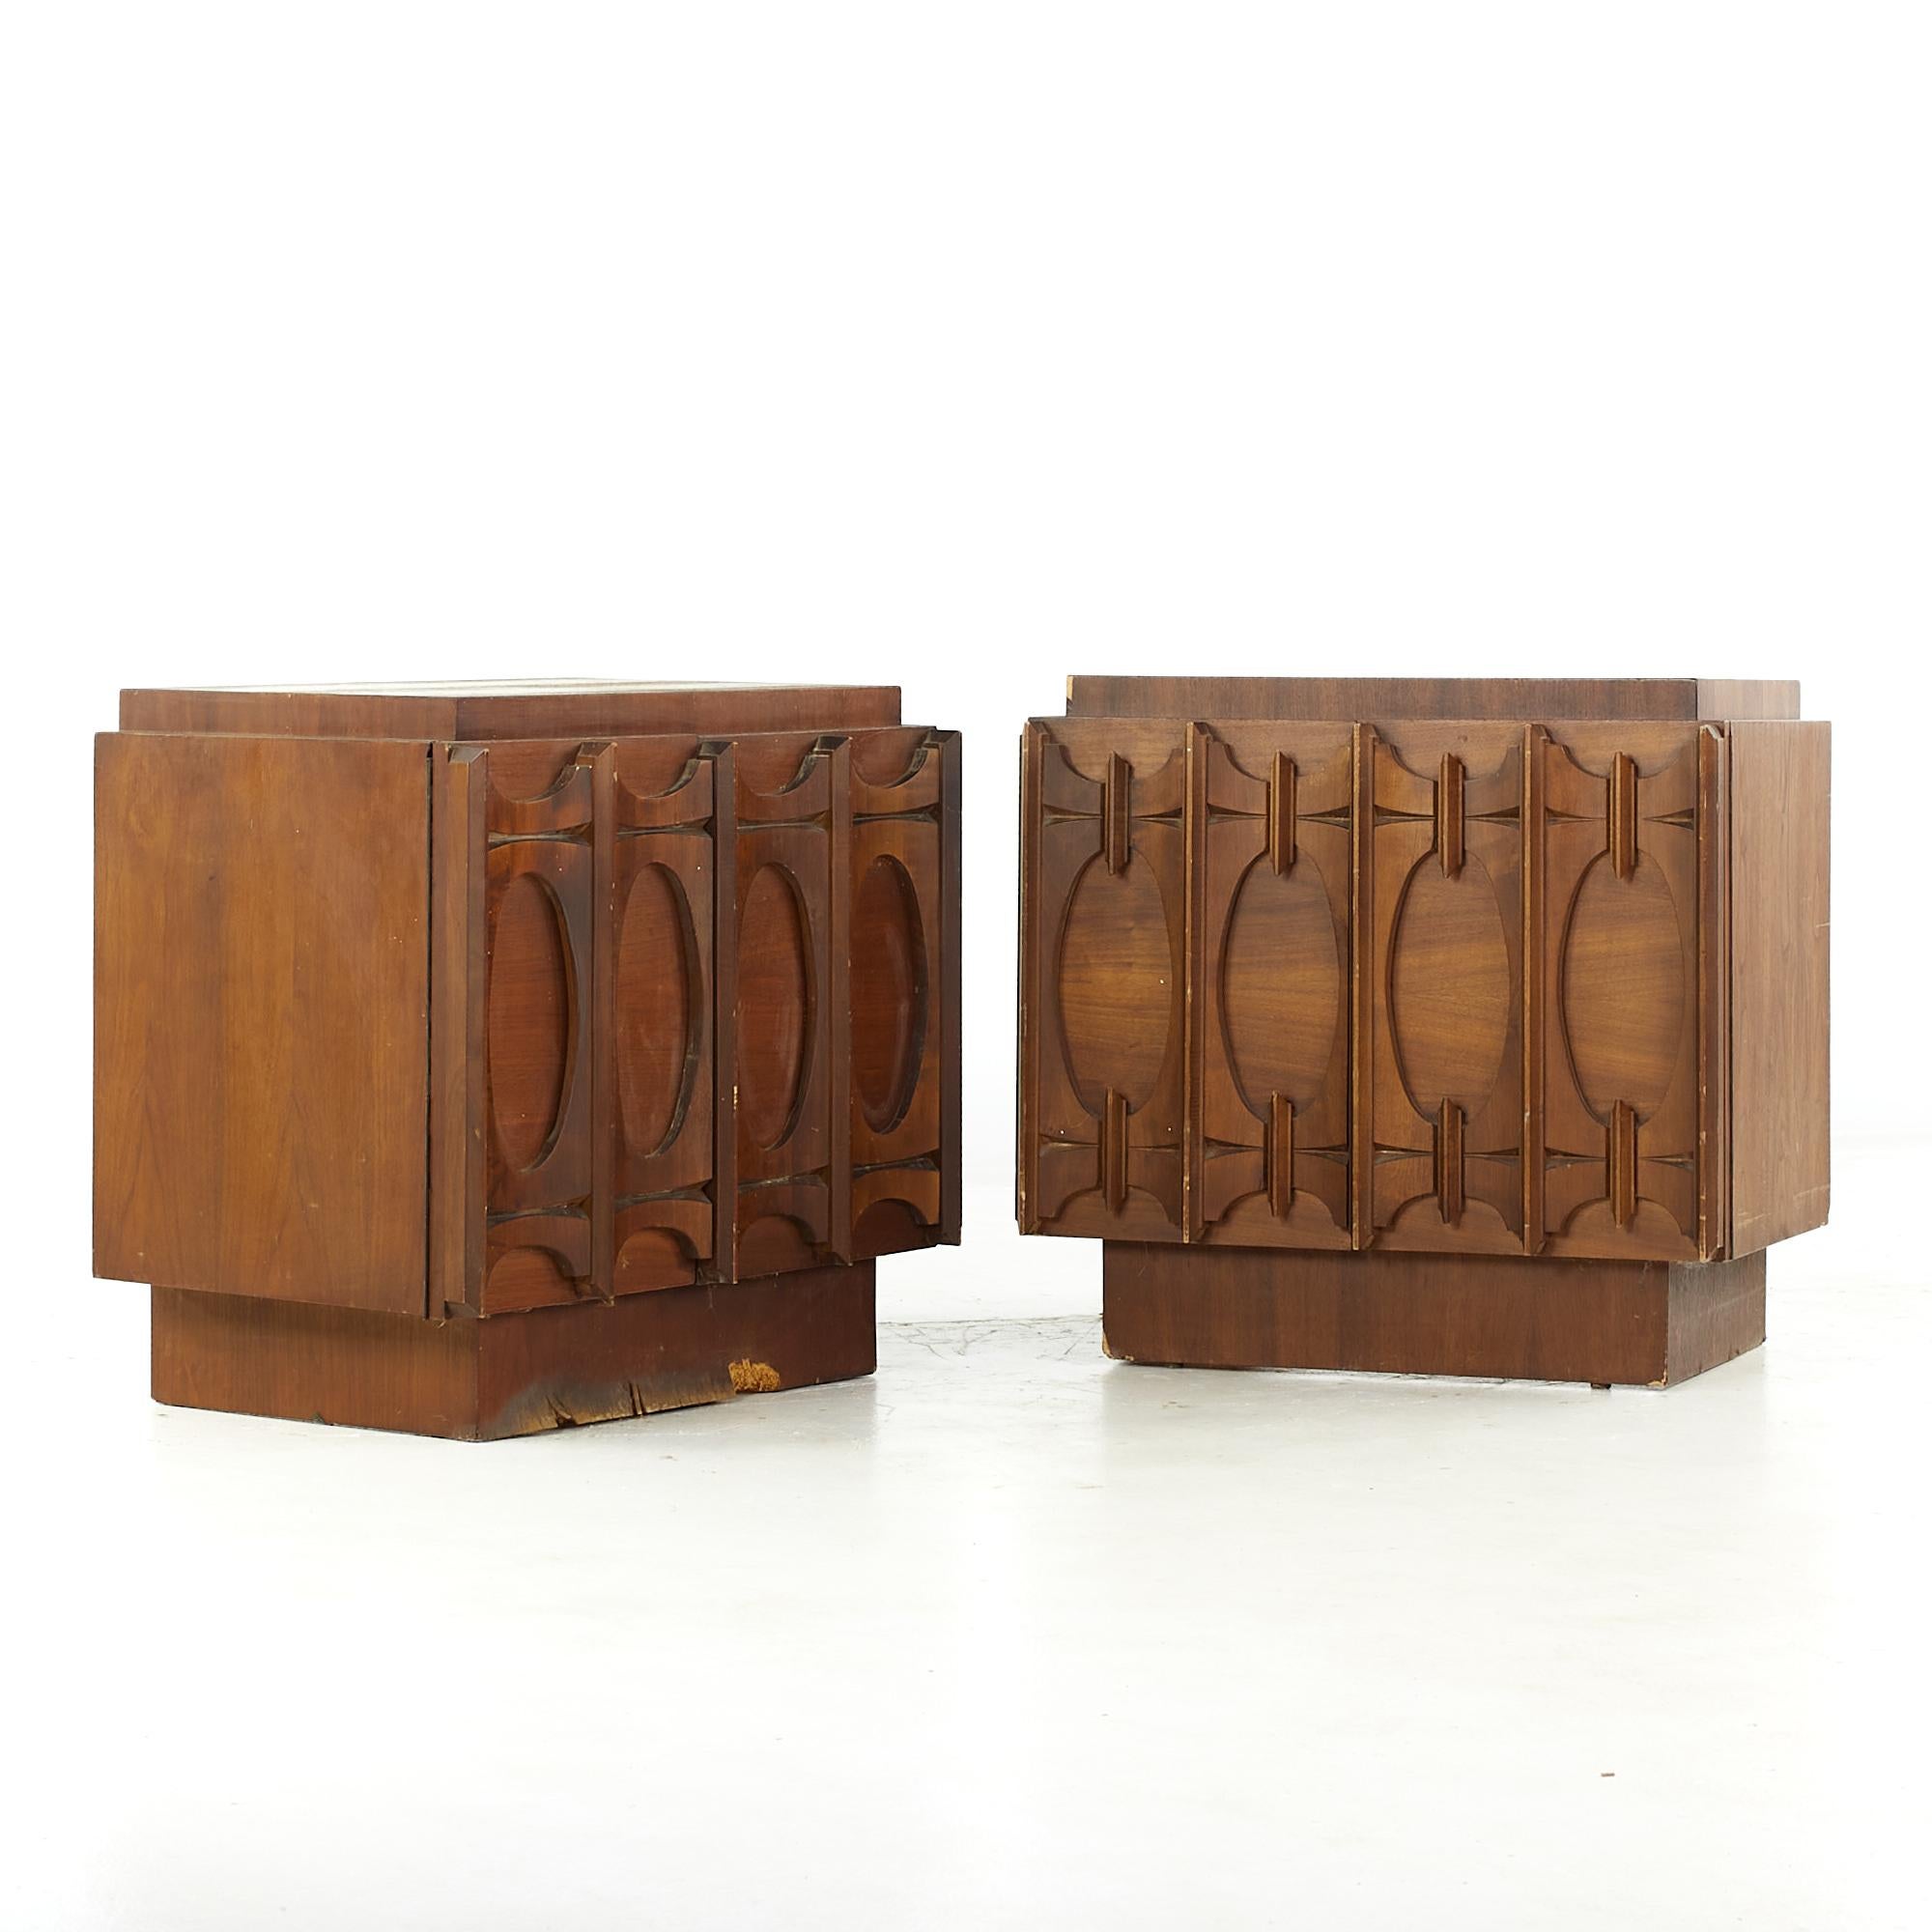 Tobago Brutalist midcentury walnut nightstands, pair.

Each nightstand measures: 26 wide x 18 deep x 24.75 inches high.

All pieces of furniture can be had in what we call restored vintage condition. That means the piece is restored upon